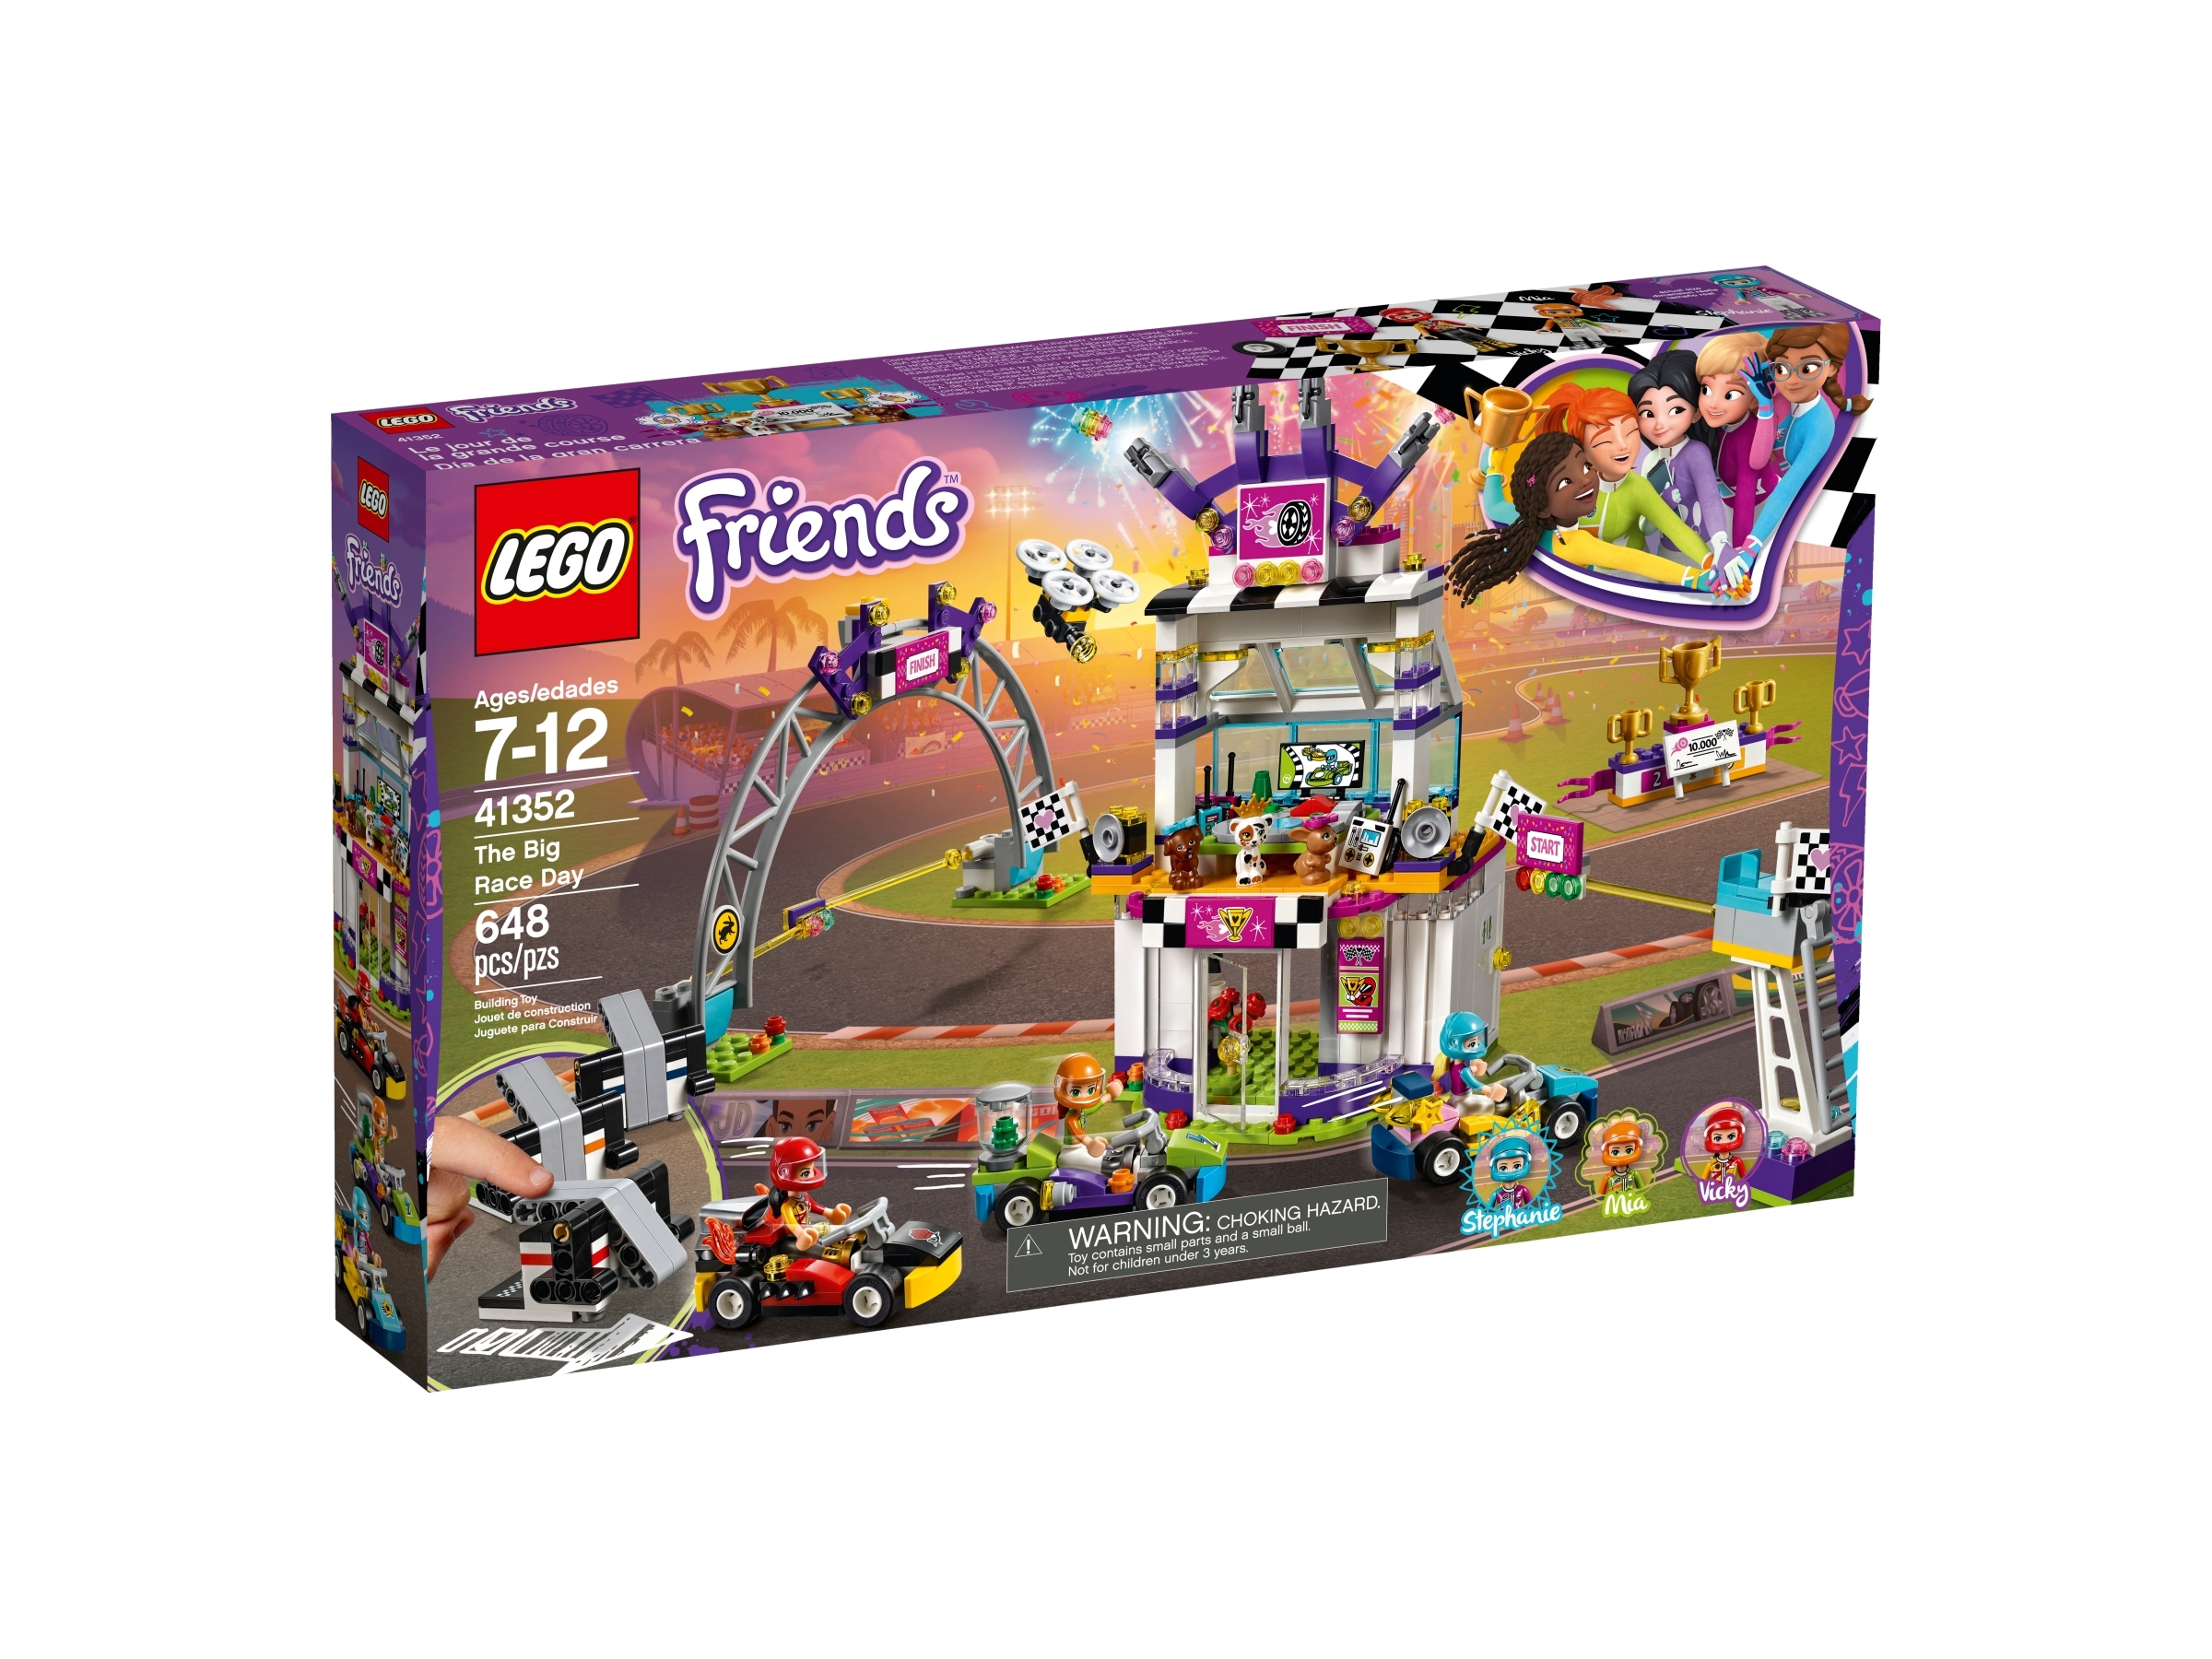 race Shetland kontrollere The Big Race Day 41352 | Friends | Buy online at the Official LEGO® Shop US